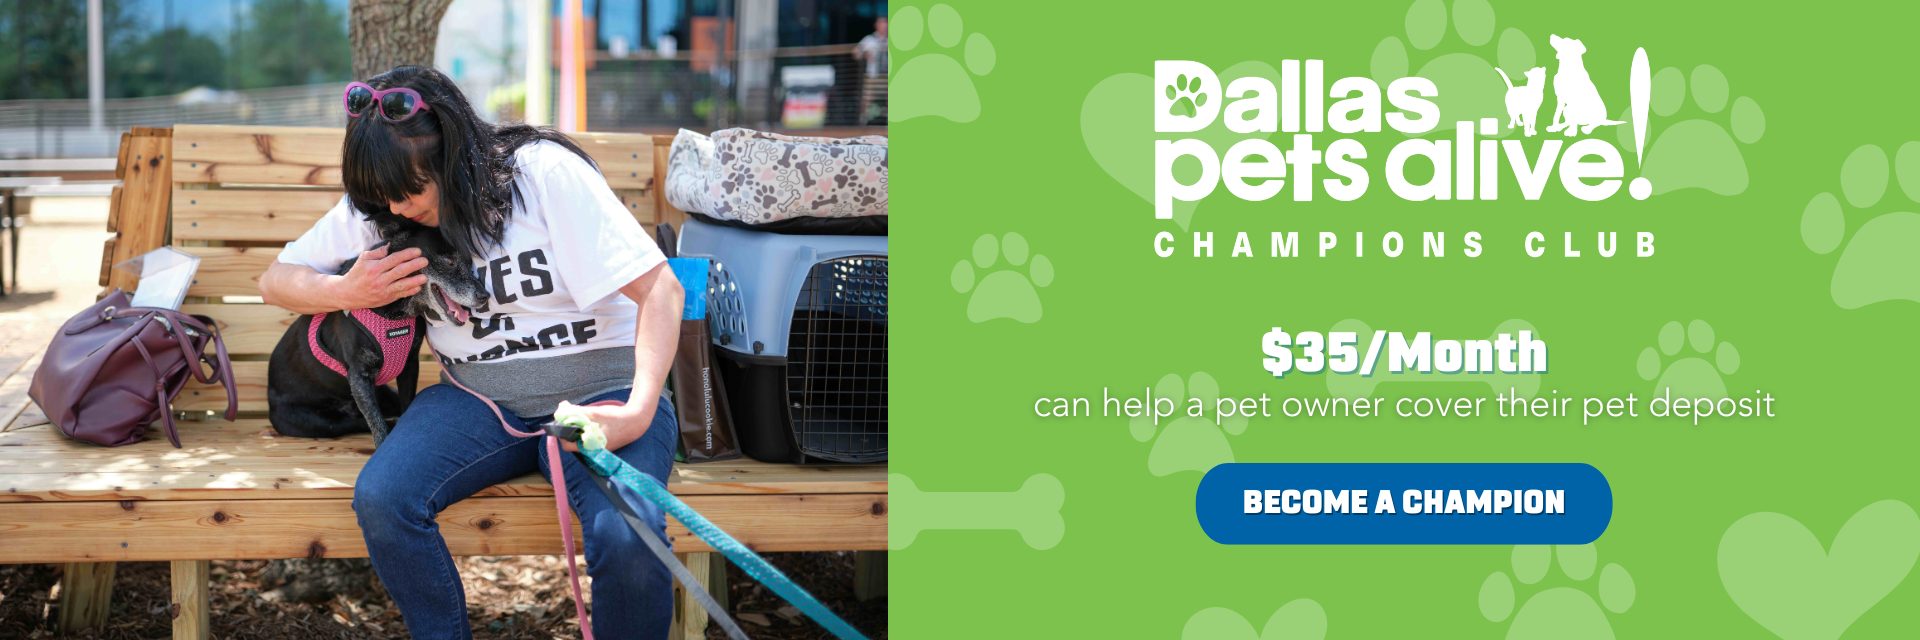 $35/month can help a pet owner cover their pet deposit